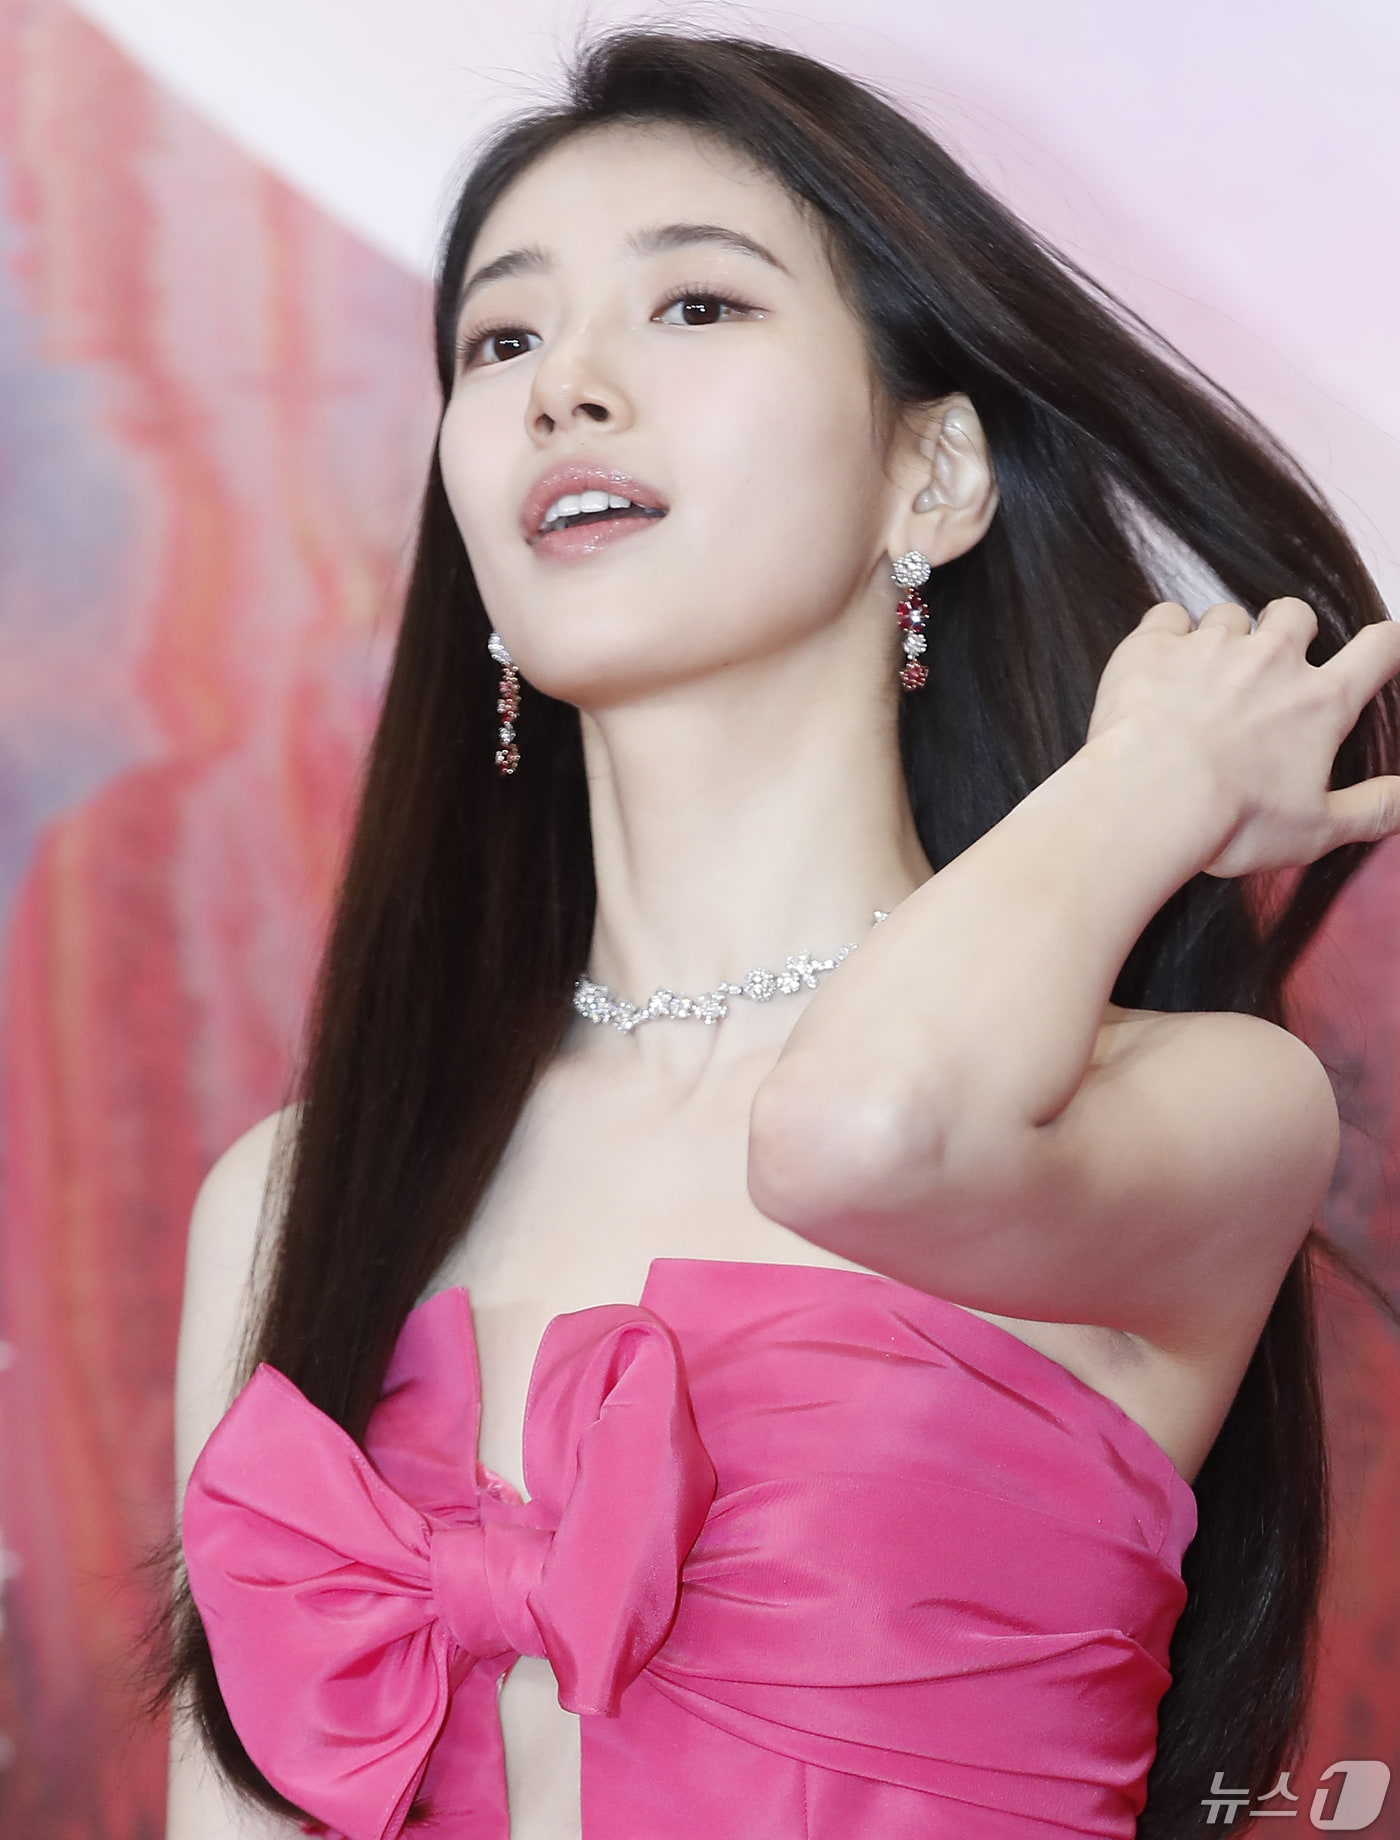 Suzy's stunning beauty that resonates with the word 'billion'... The price of the necklace alone is 5 billion.